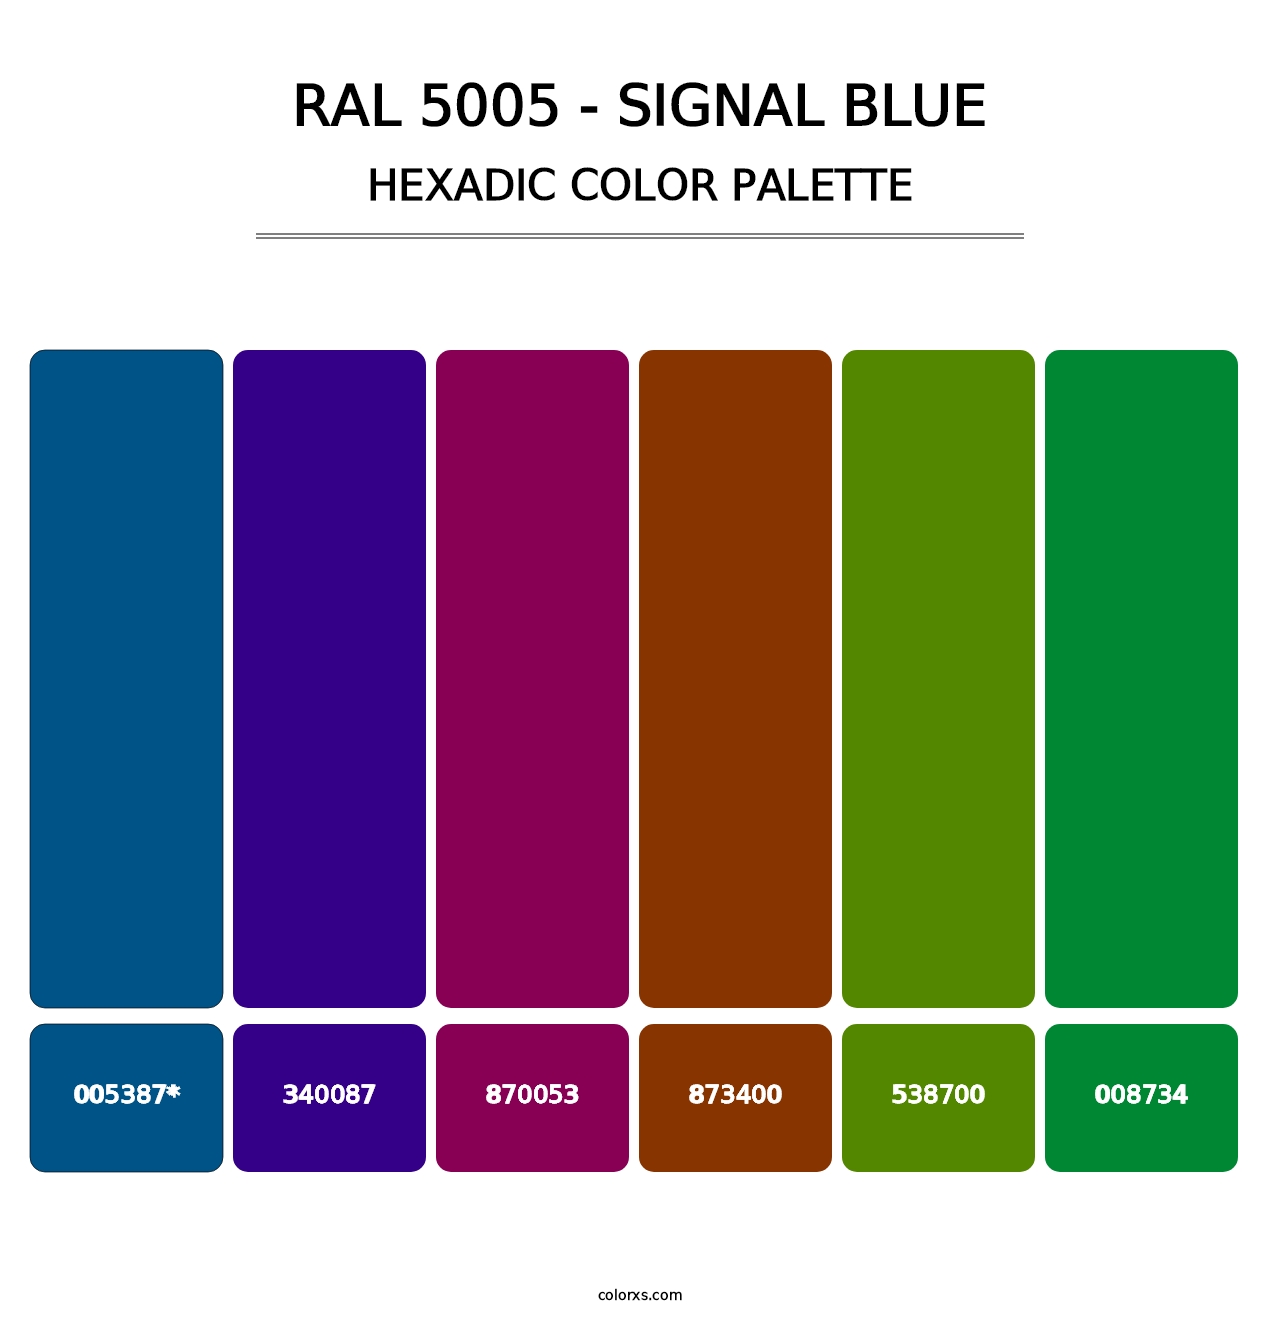 RAL 5005 - Signal Blue - Hexadic Color Palette